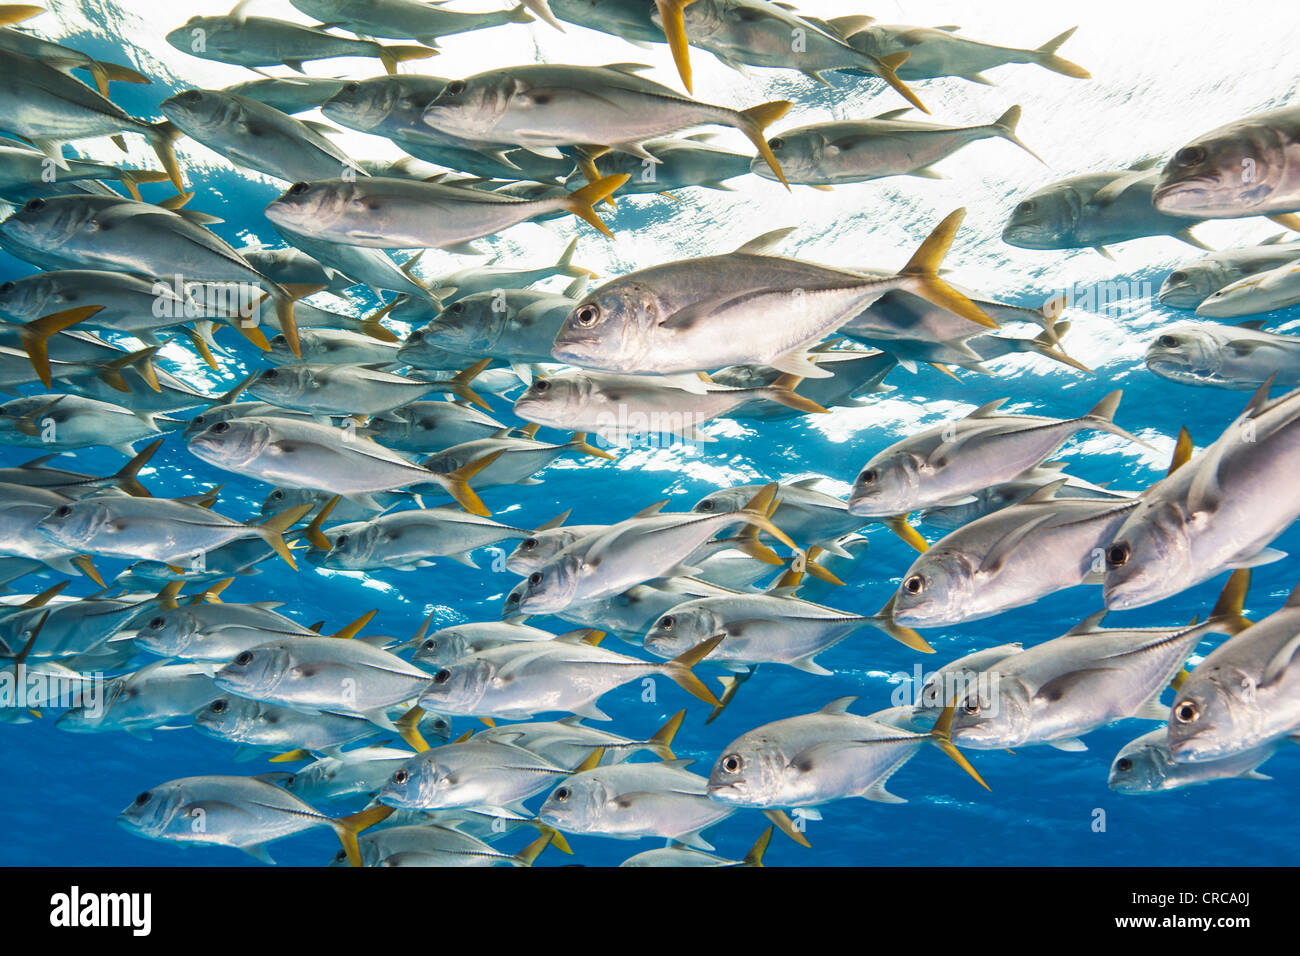 A large school of Horse-eye Jacks at a divesite in Turks & Caicos Stock Photo